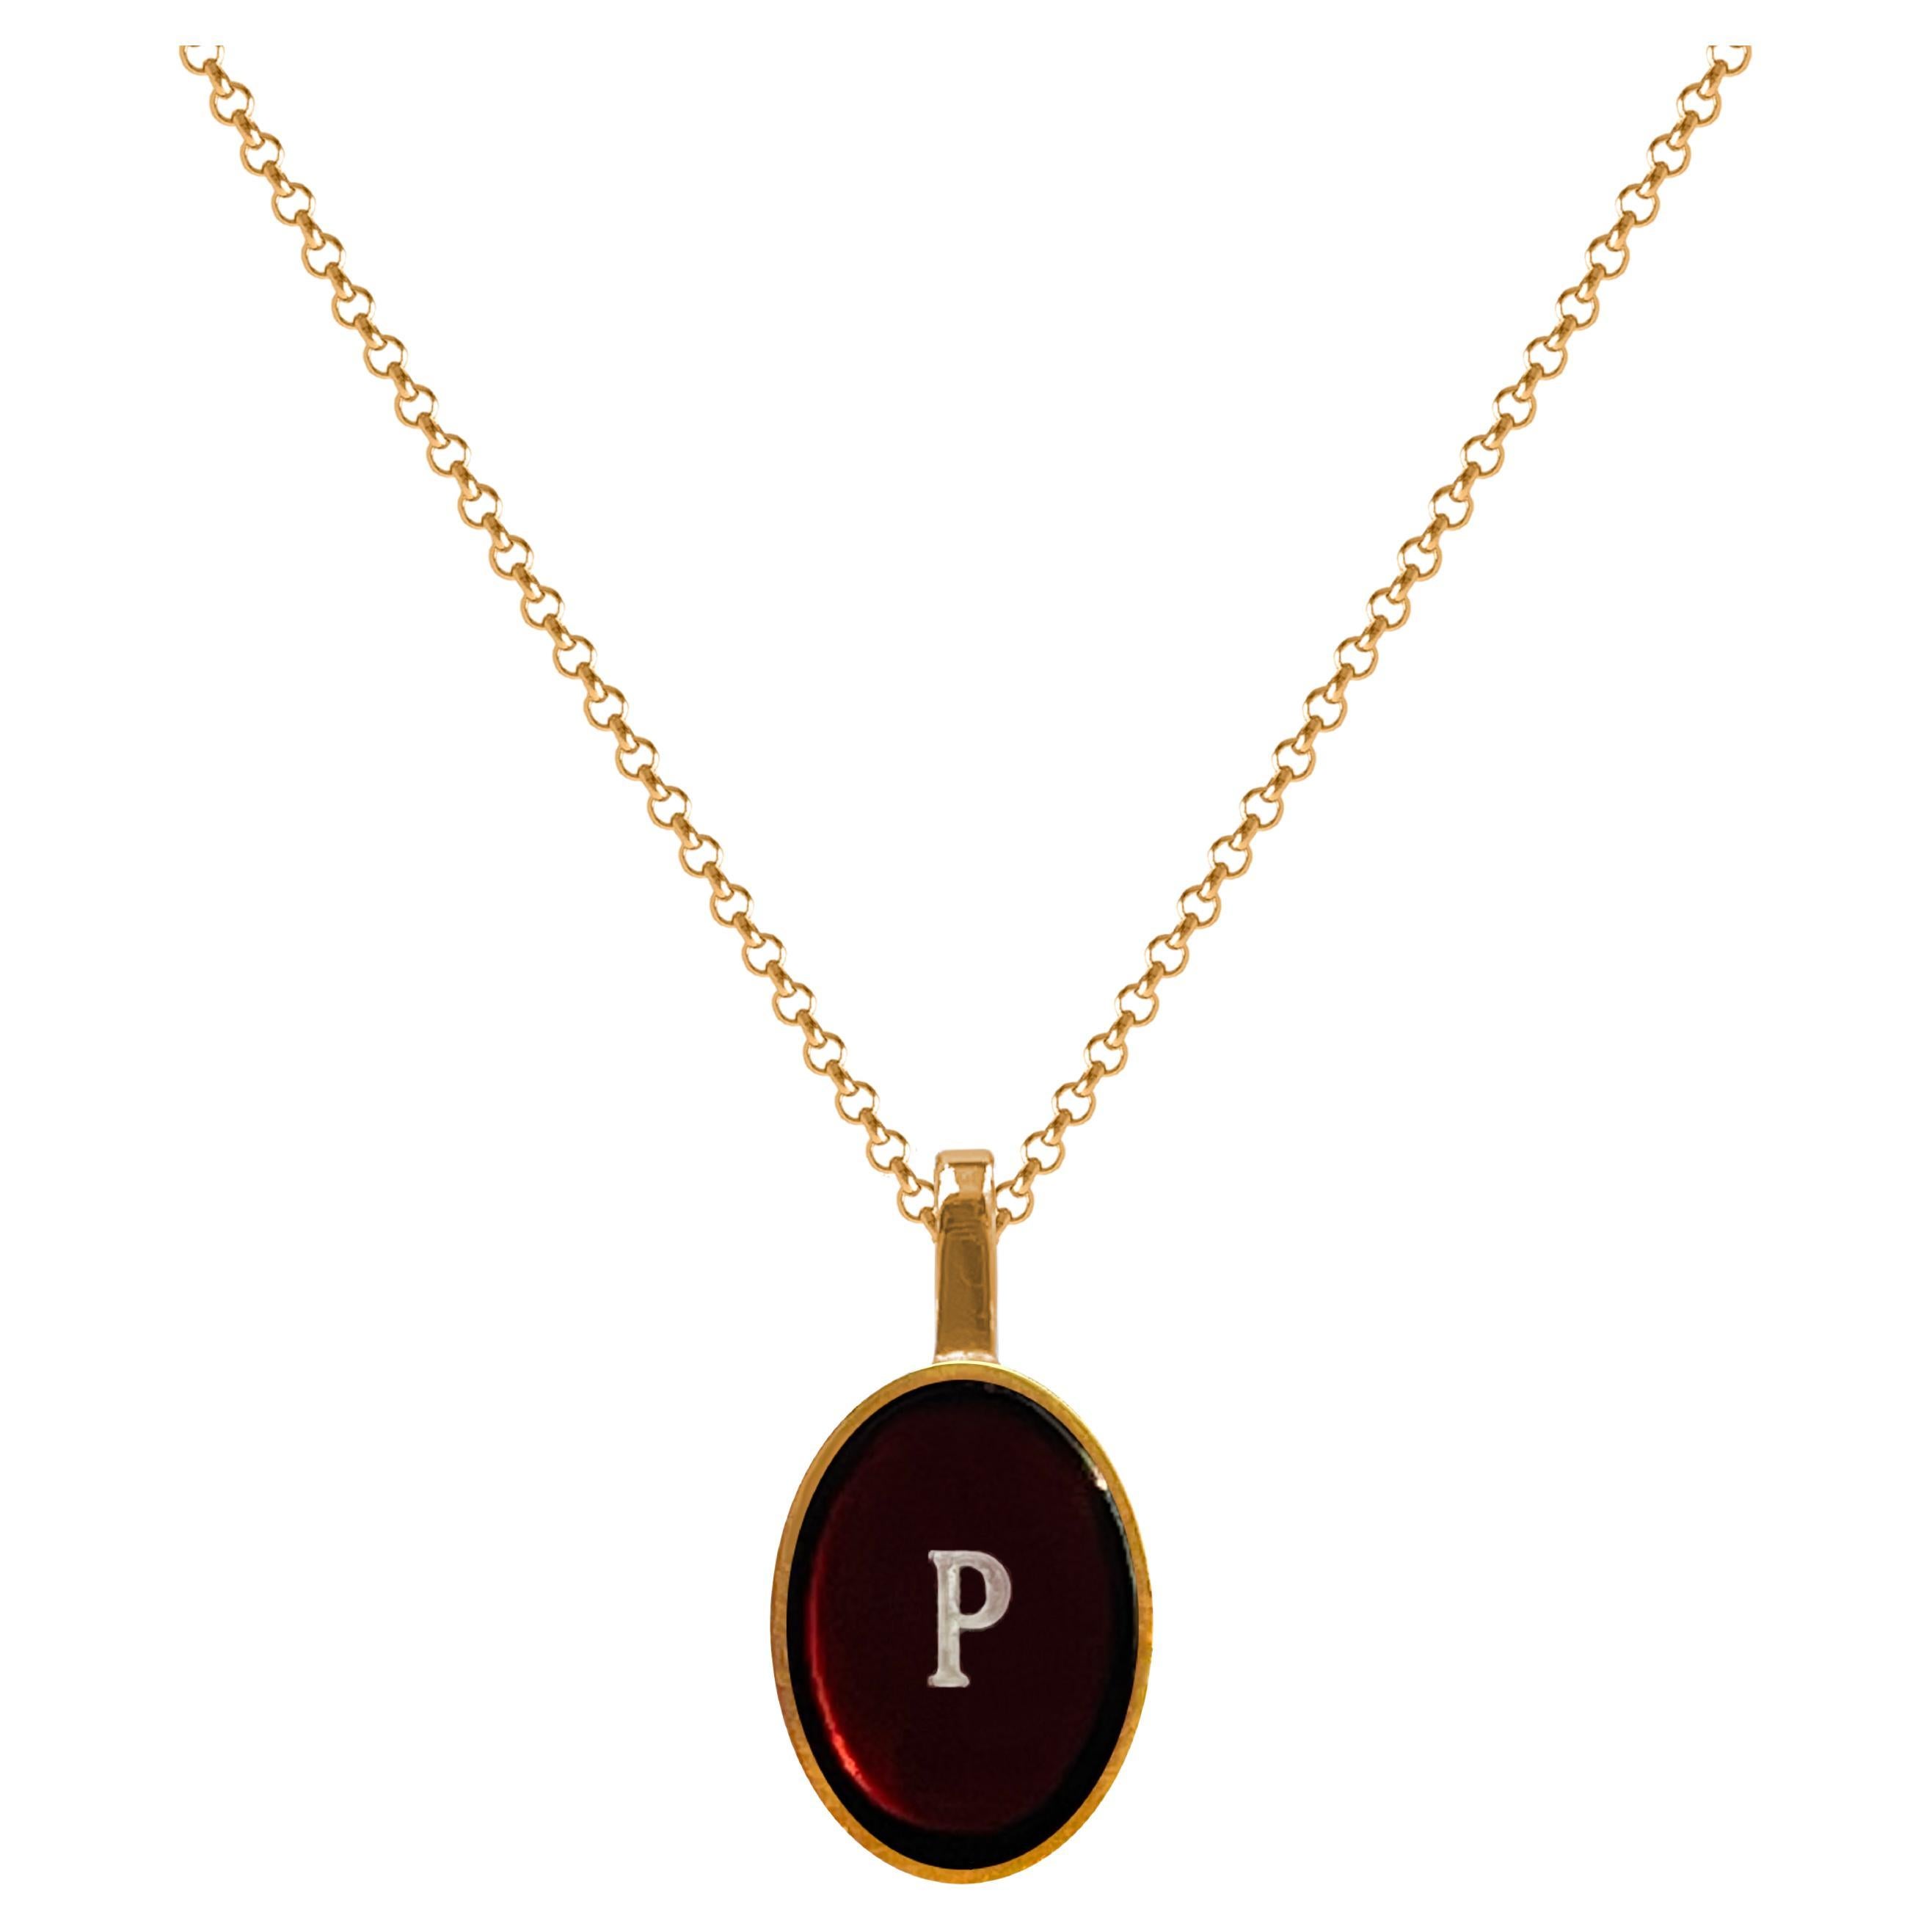 Necklace with amber pendant and name letter gold - P For Sale